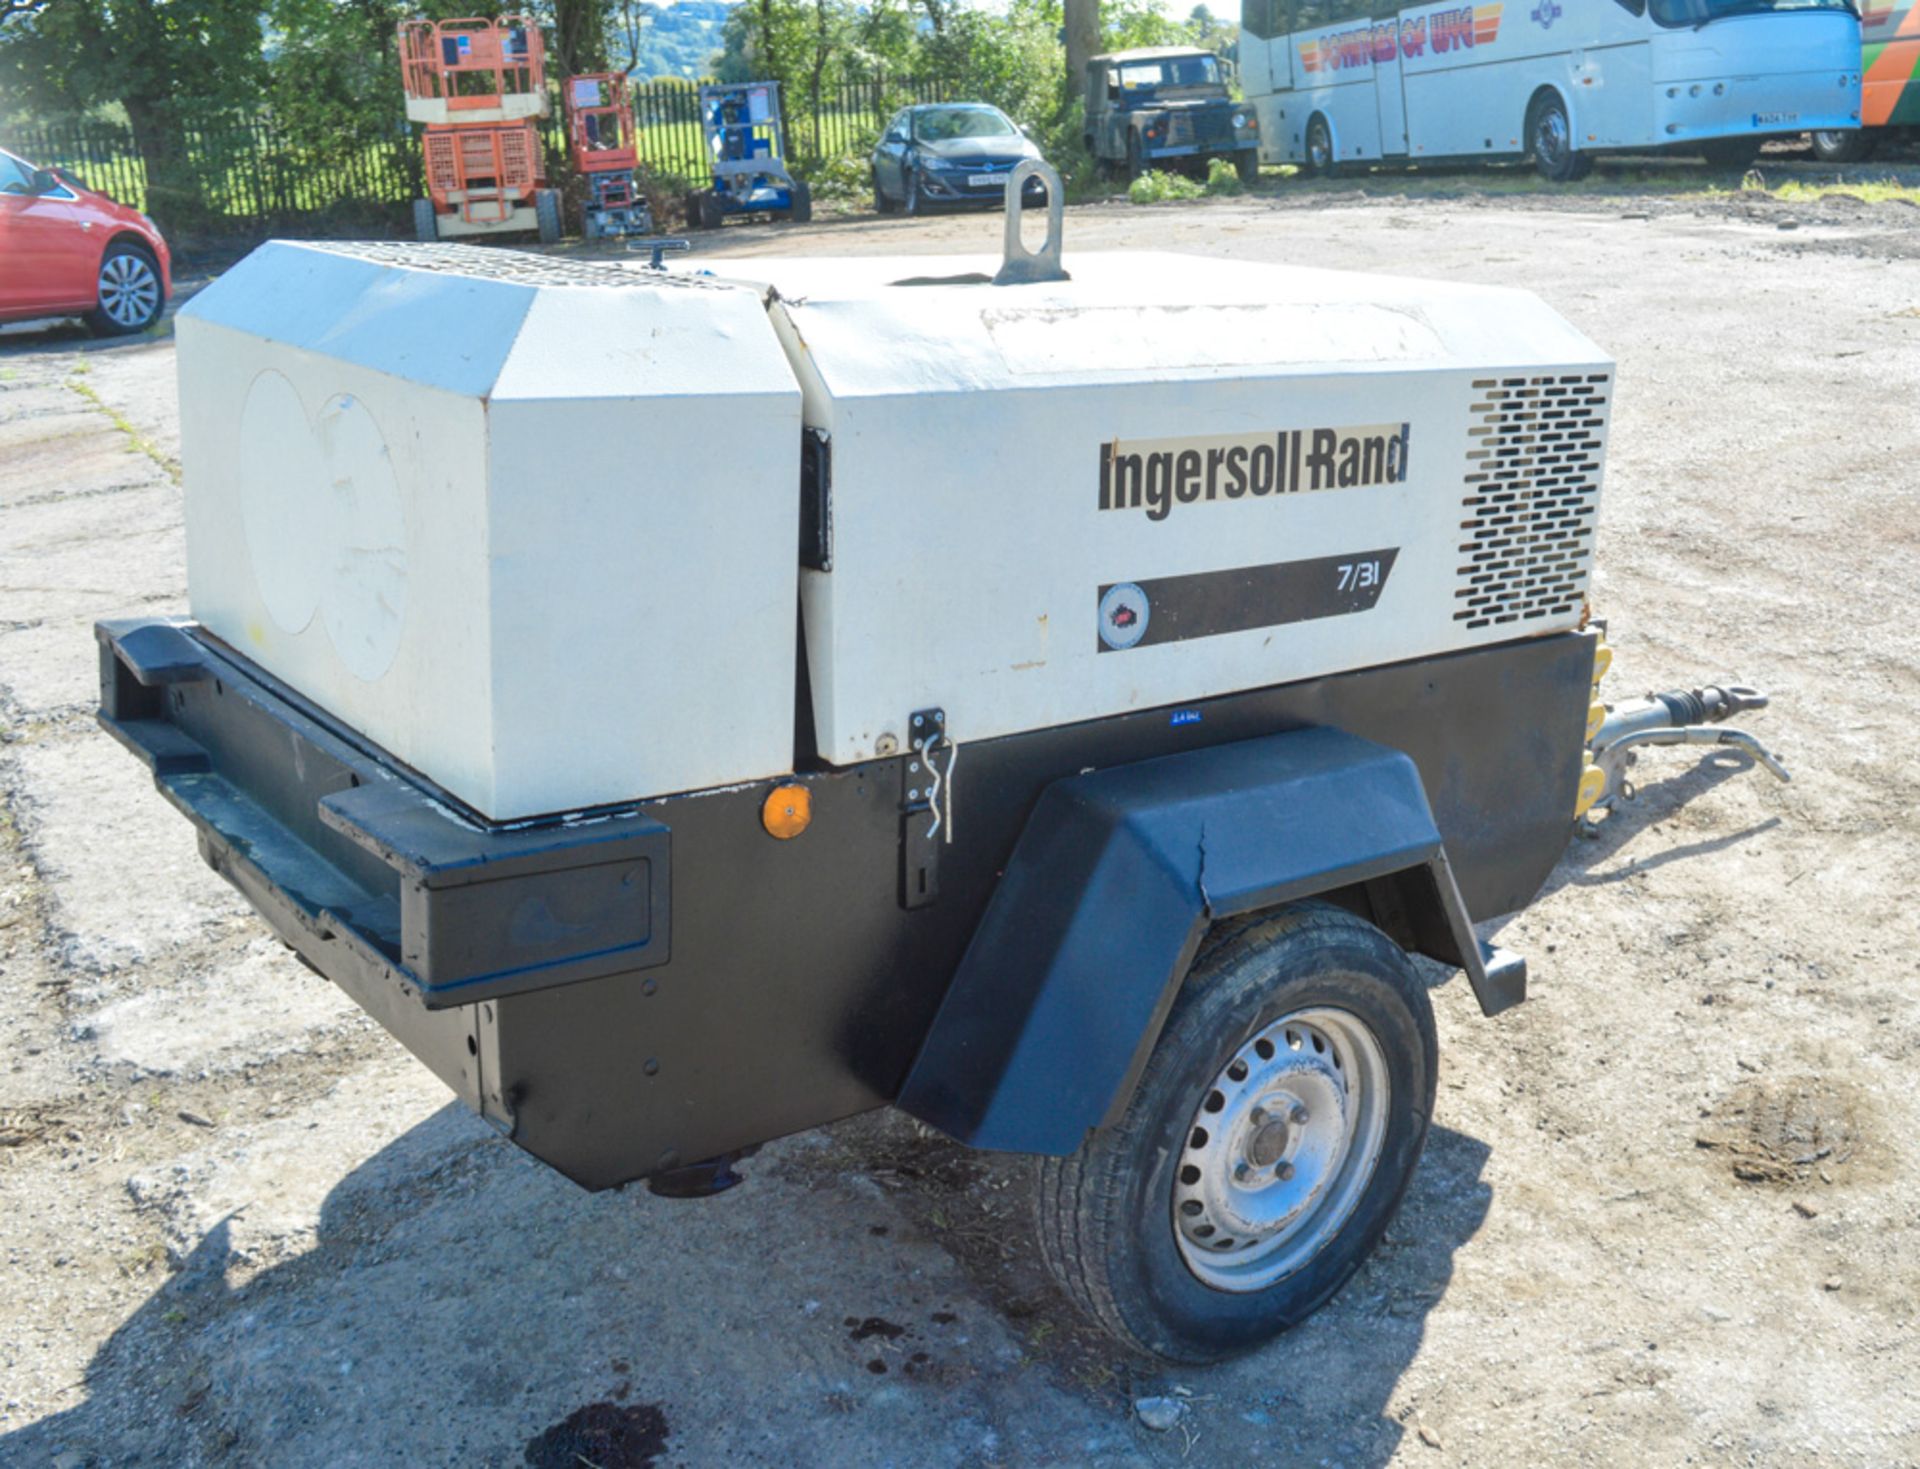 Ingersoll Rand 7/31 diesel driven mobile air compressor/generator Year: 2005 S/N: 317808 Recorded - Image 4 of 5